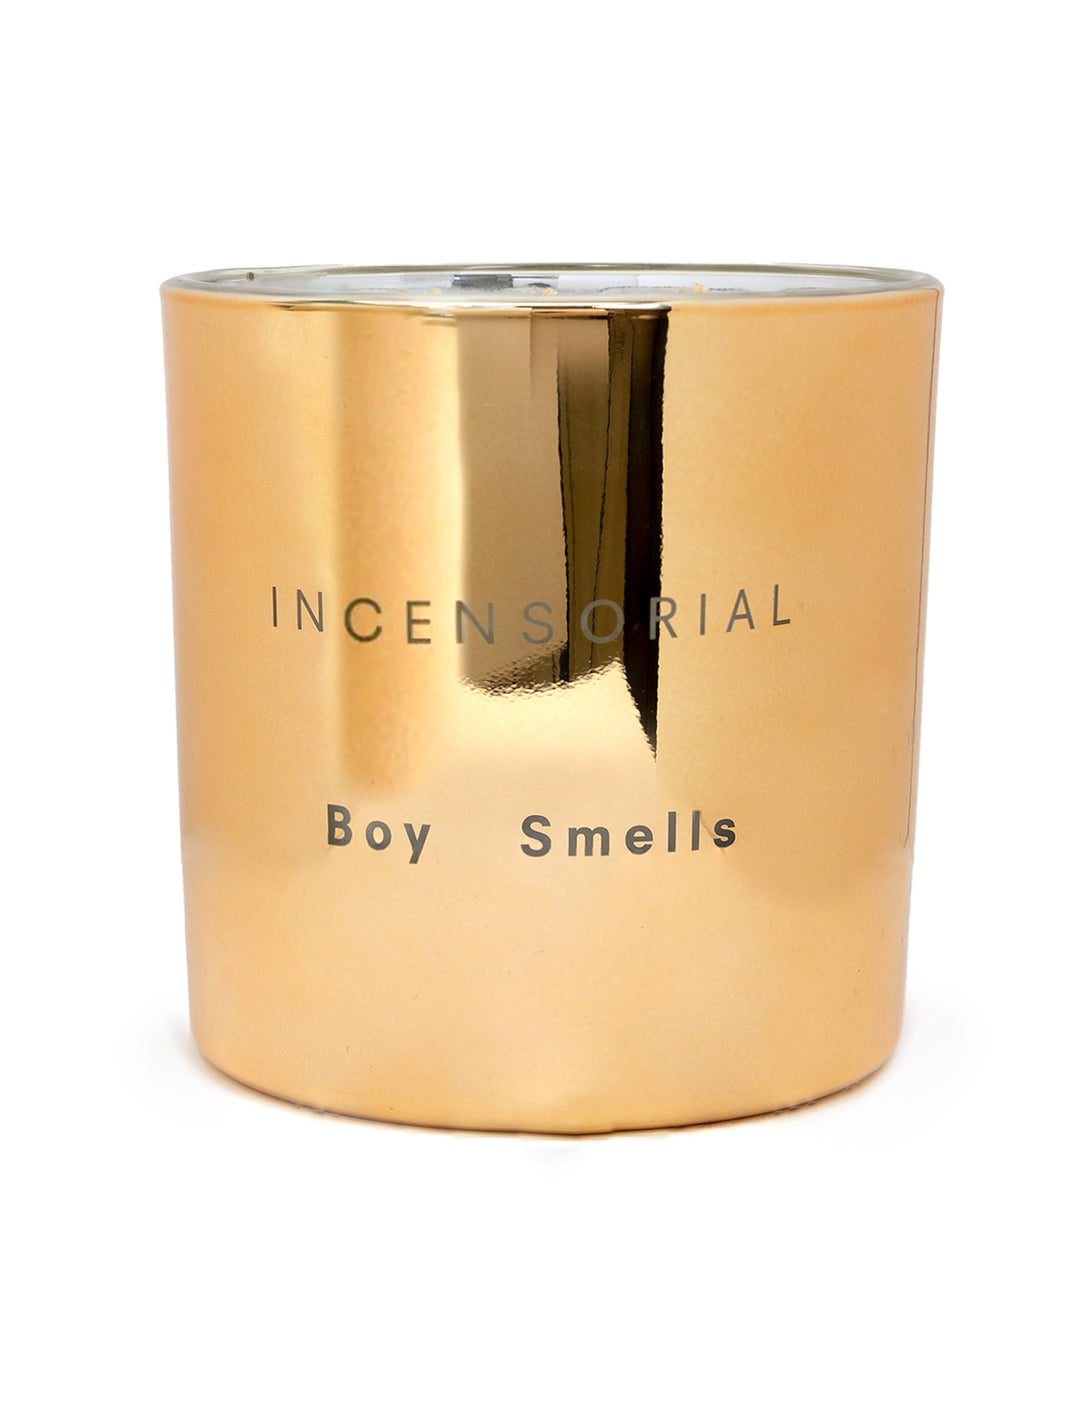 Front view of Boy Smells' incensorial magnum candle.